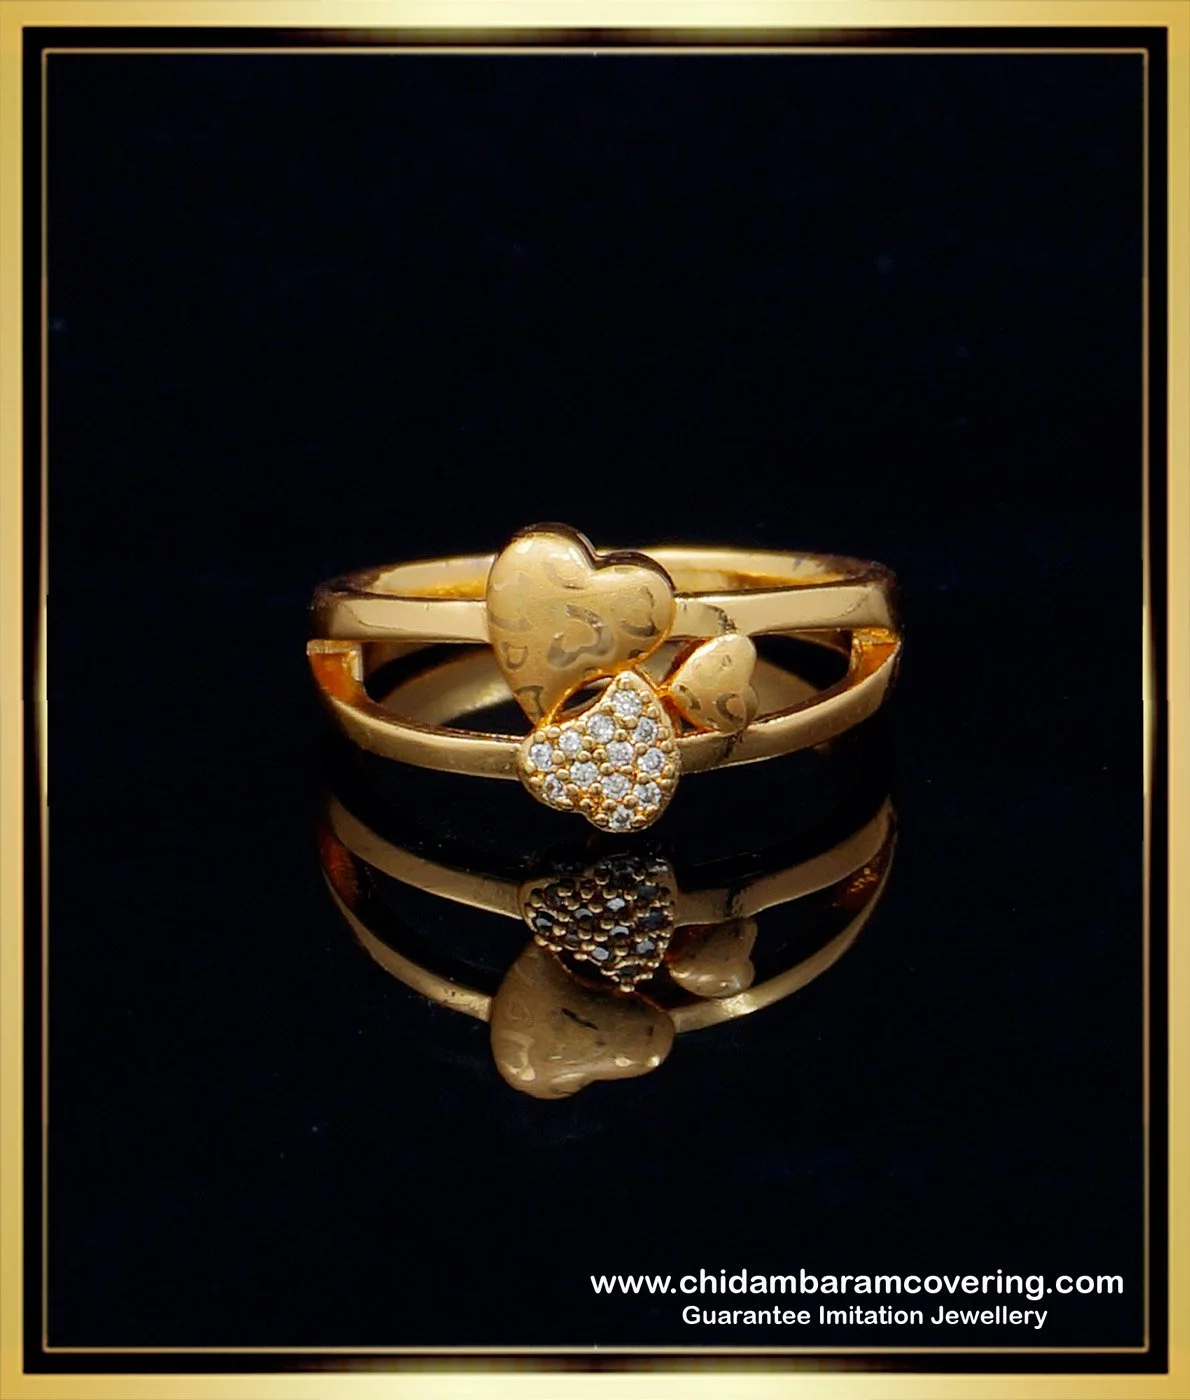 Natural Fancy Intense Yellow and White Diamond Ring — Your Most Trusted  Brand for Fine Jewelry & Custom Design in Yardley, PA